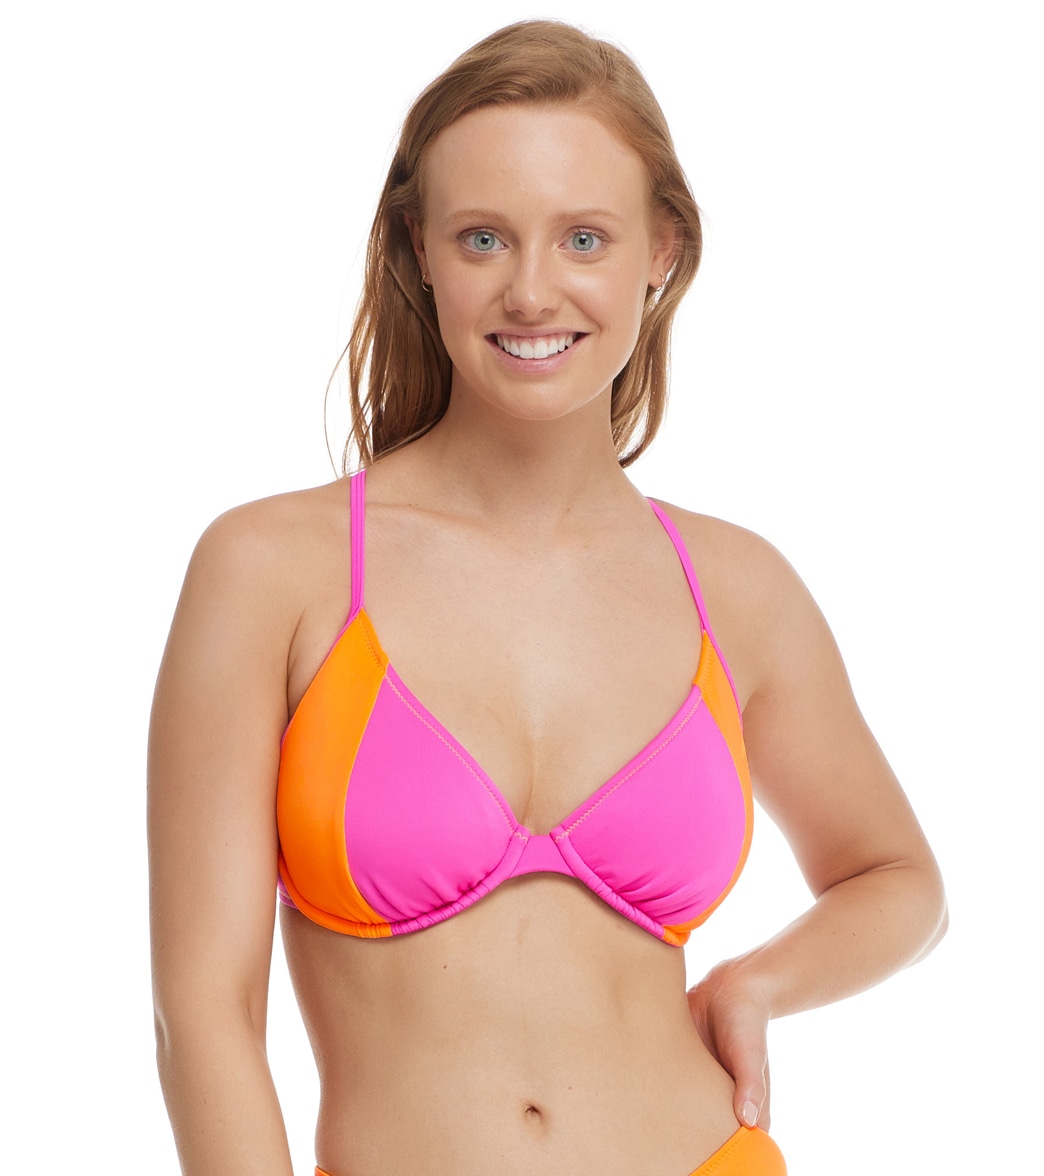 Body Glove Women's 80's Throwback Solo Bikini Top D/Dd/E/F Cup - Flamingo Pink D-Cup Polyester - Swimoutlet.com